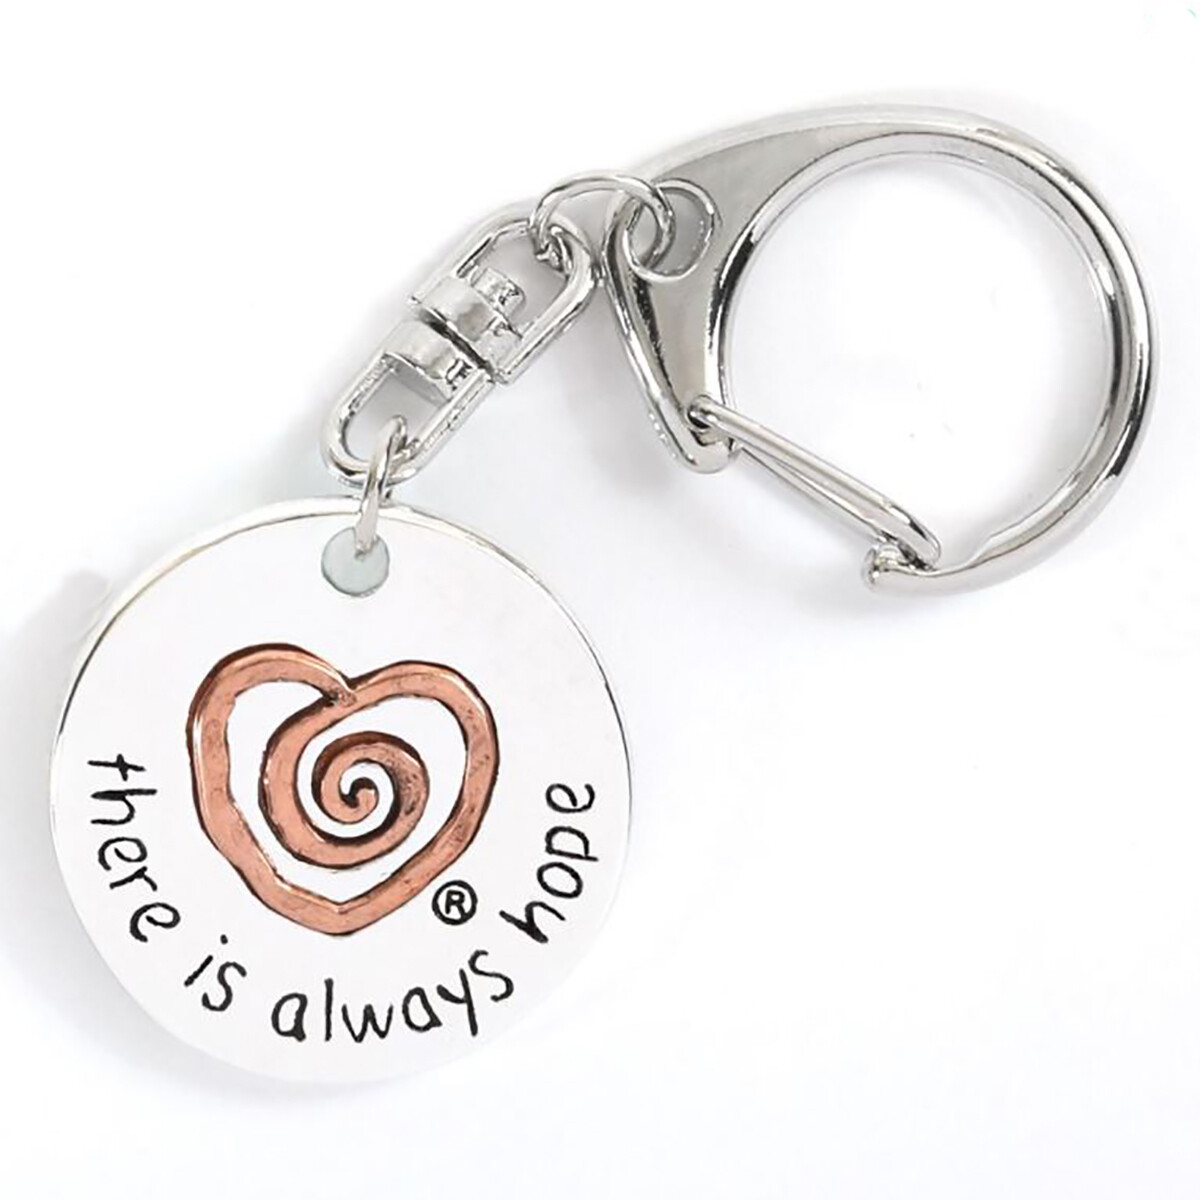 There is always hope keychain